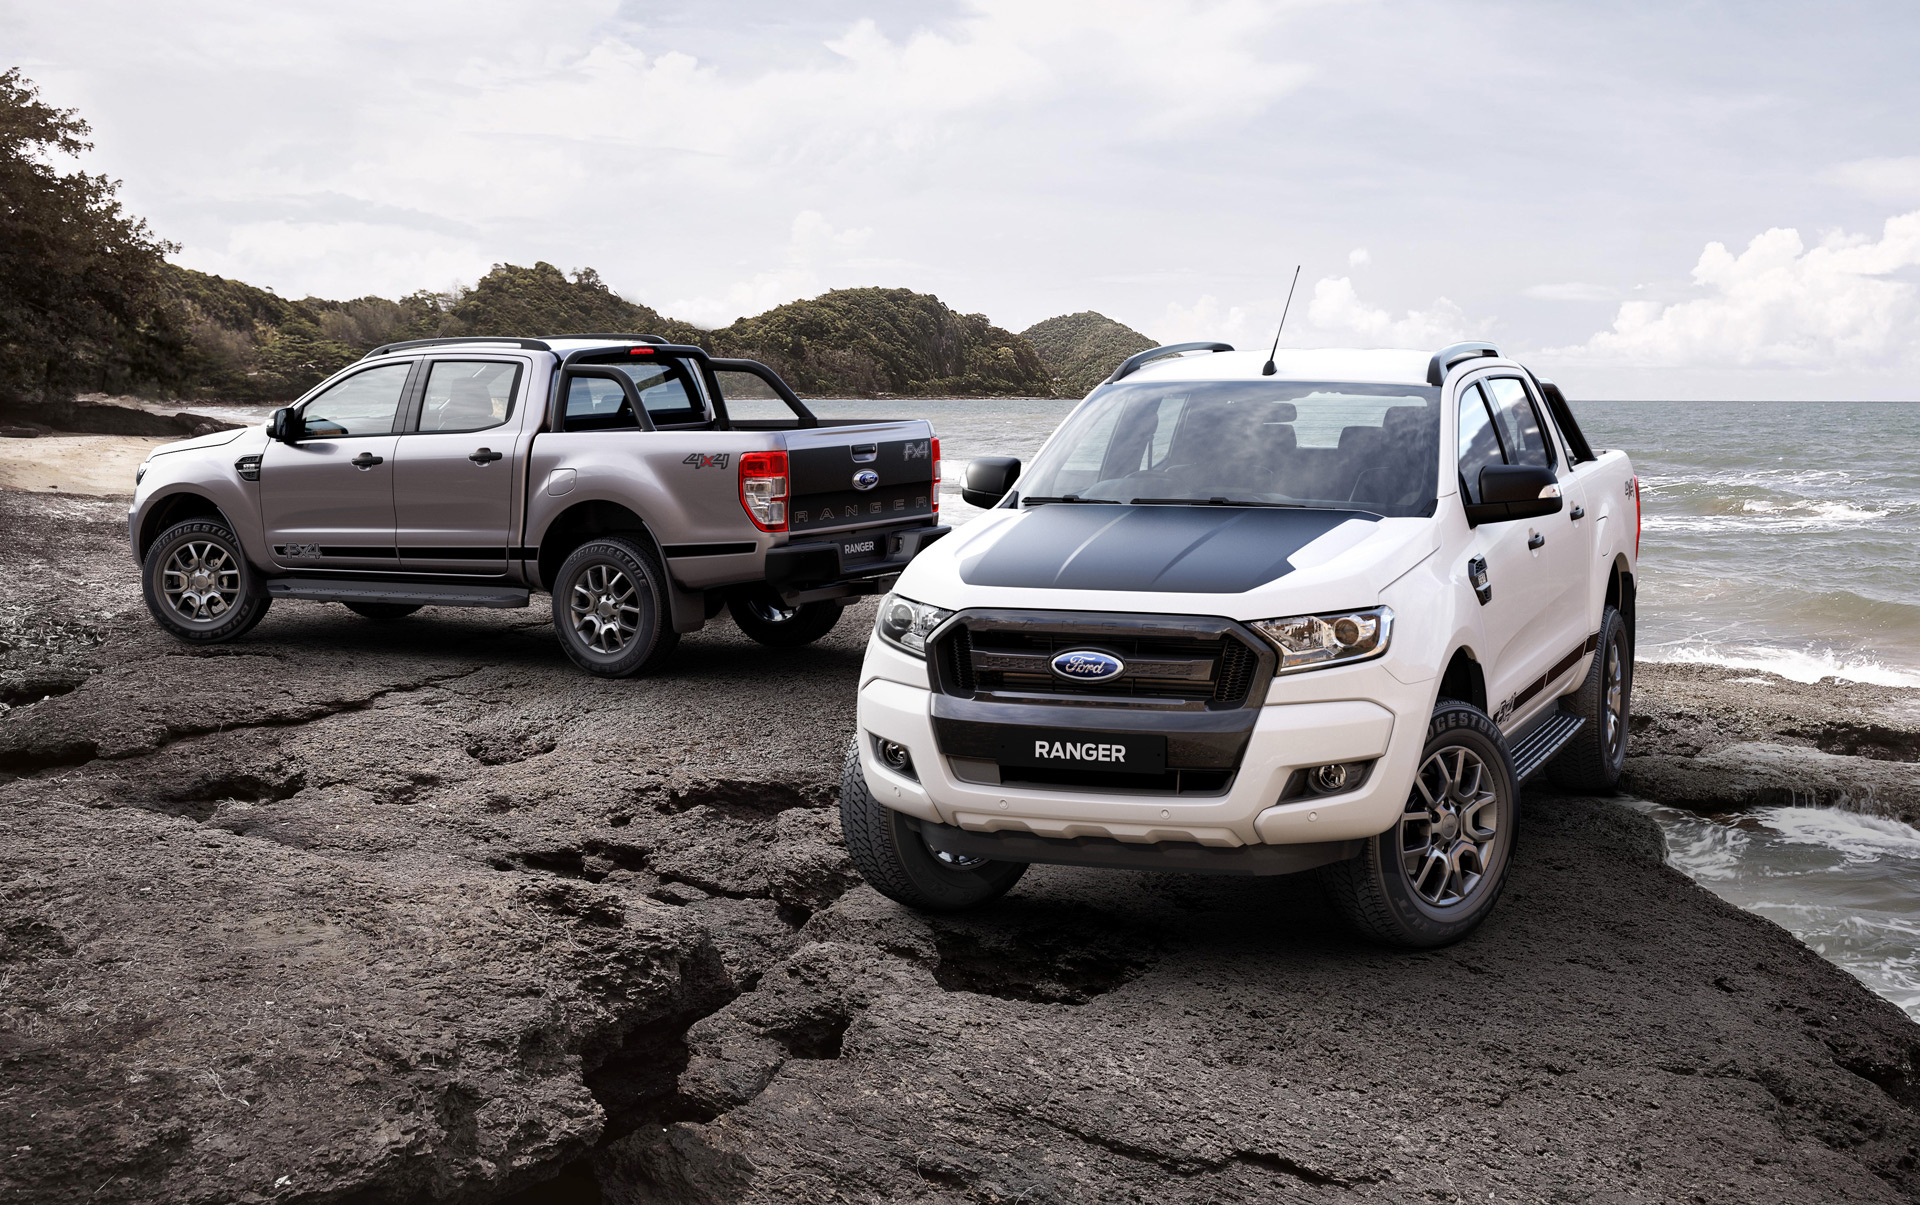 Ford Ranger: Vehicles, The second generation model of the T6-based model was released in 2021. 1920x1210 HD Wallpaper.